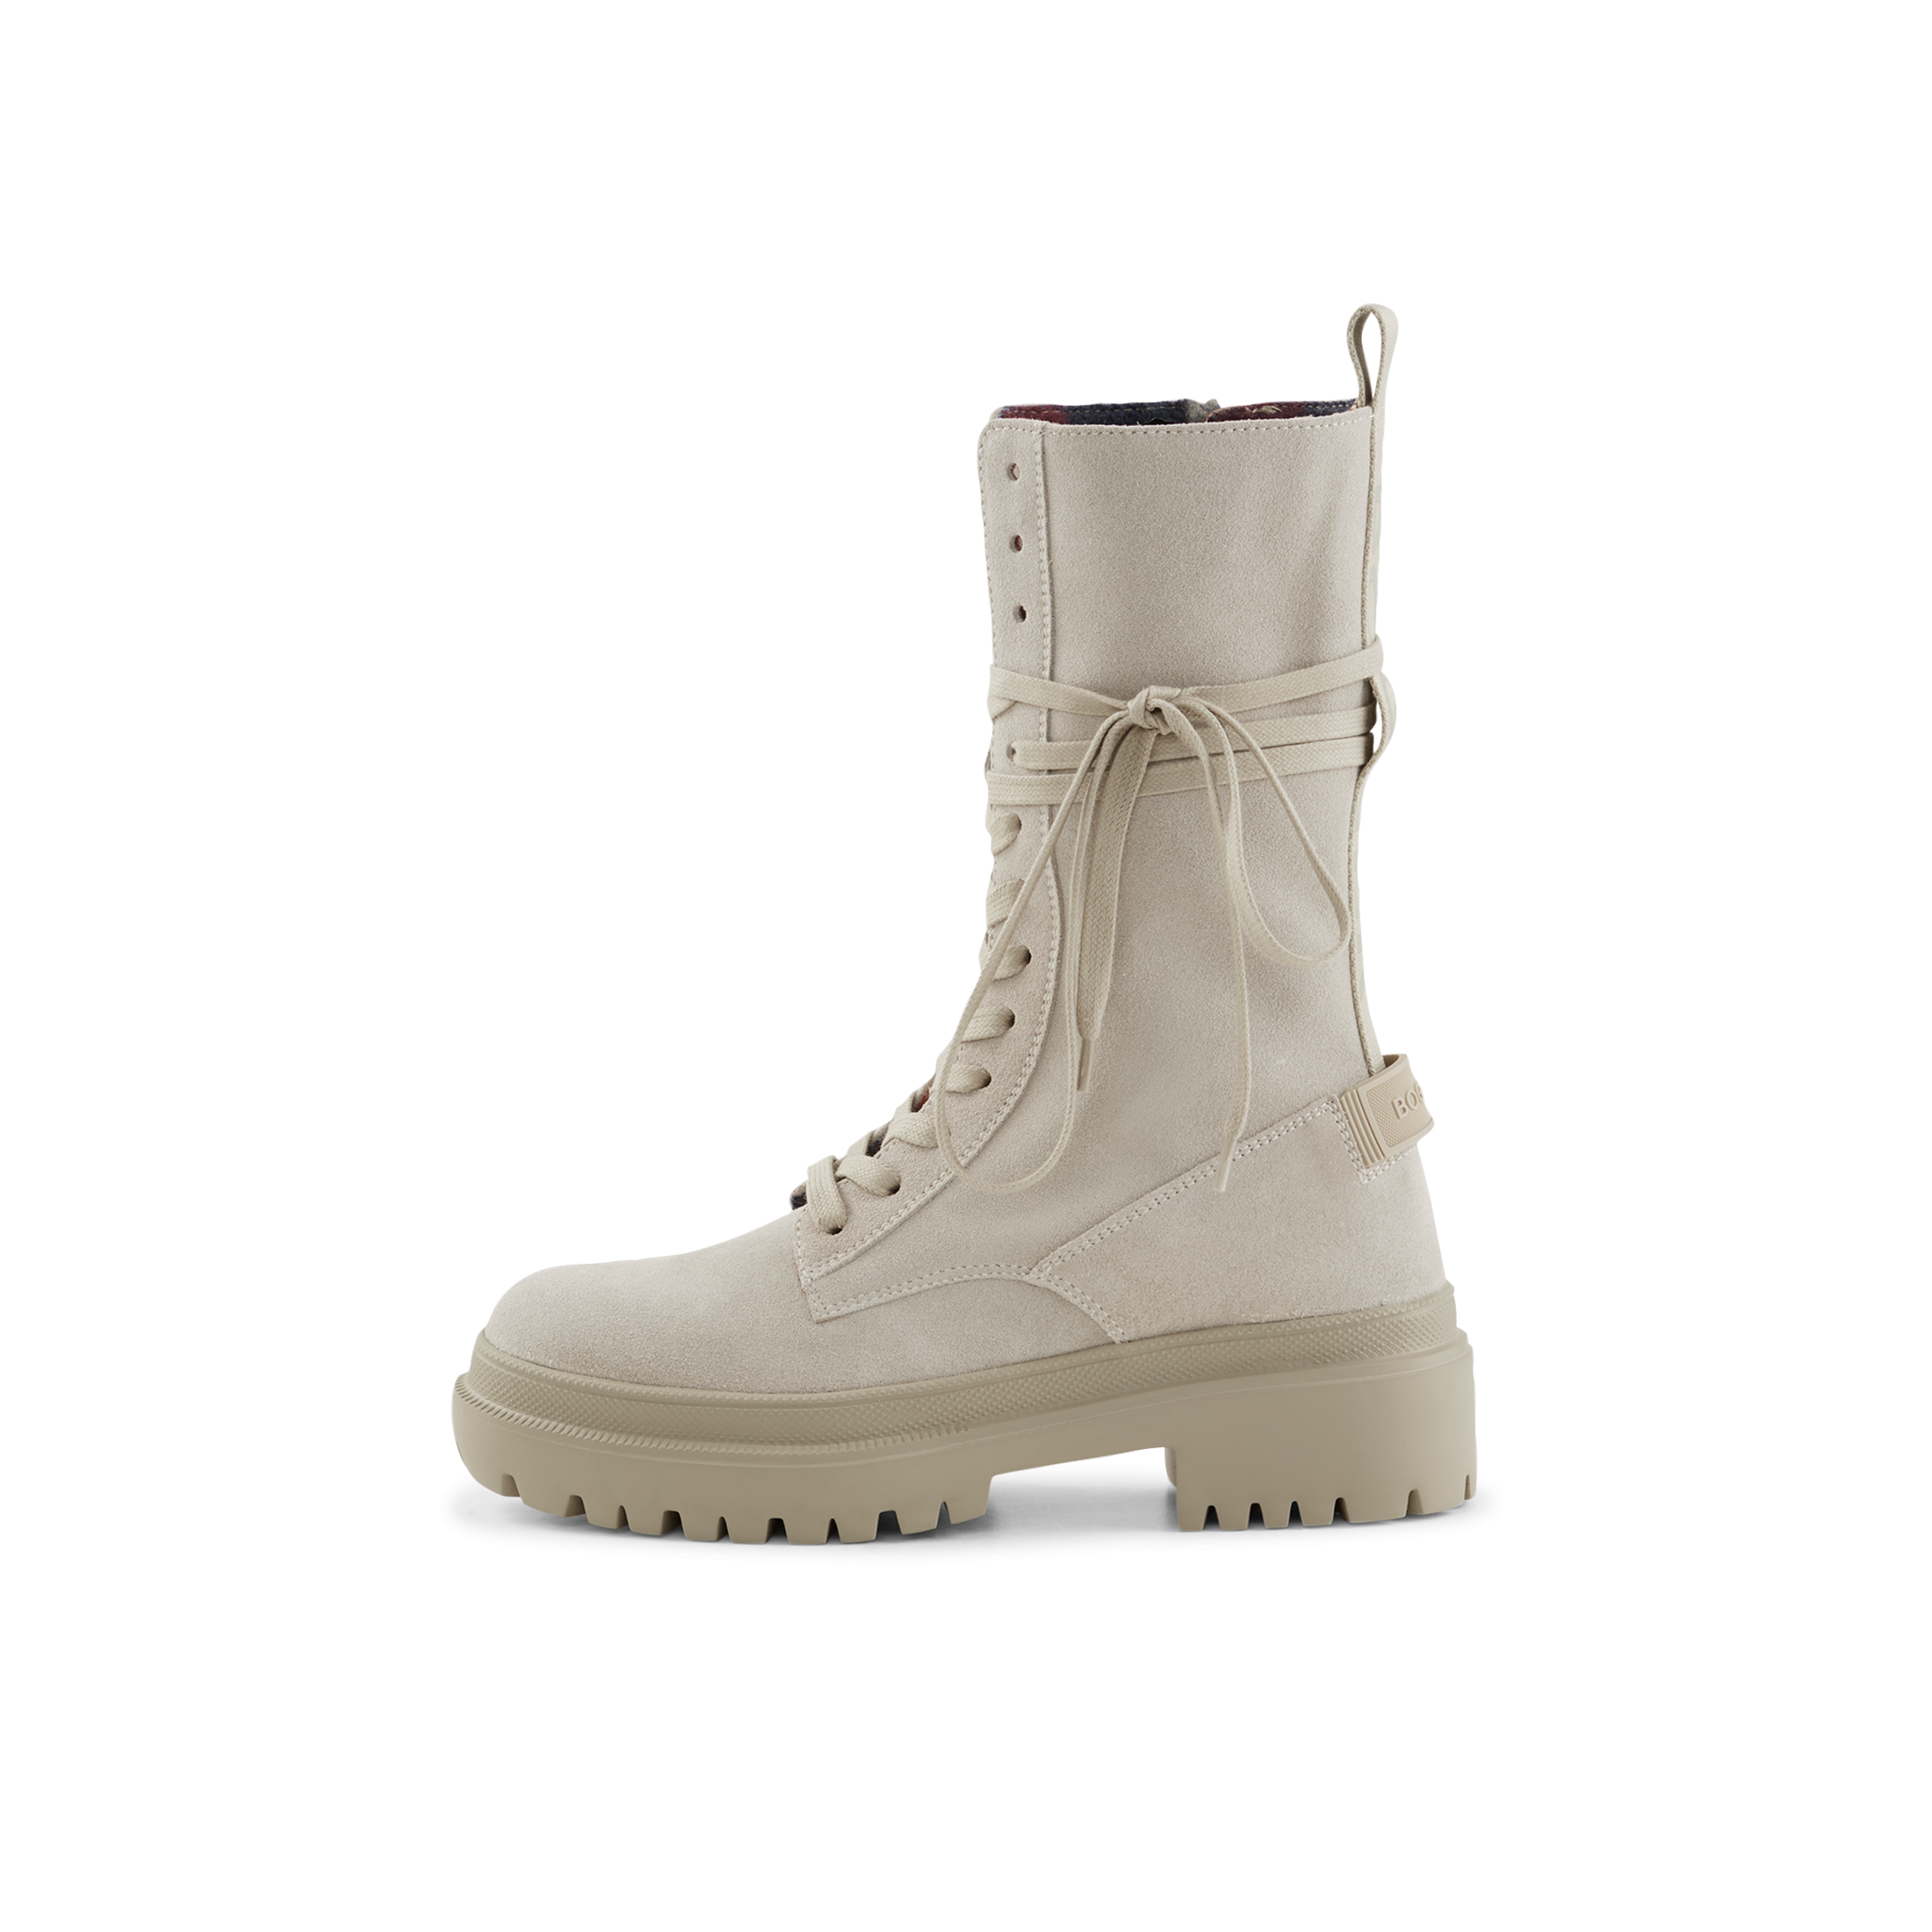 BOGNER Chesa Alpina Boots for women - Sand - US 11 product